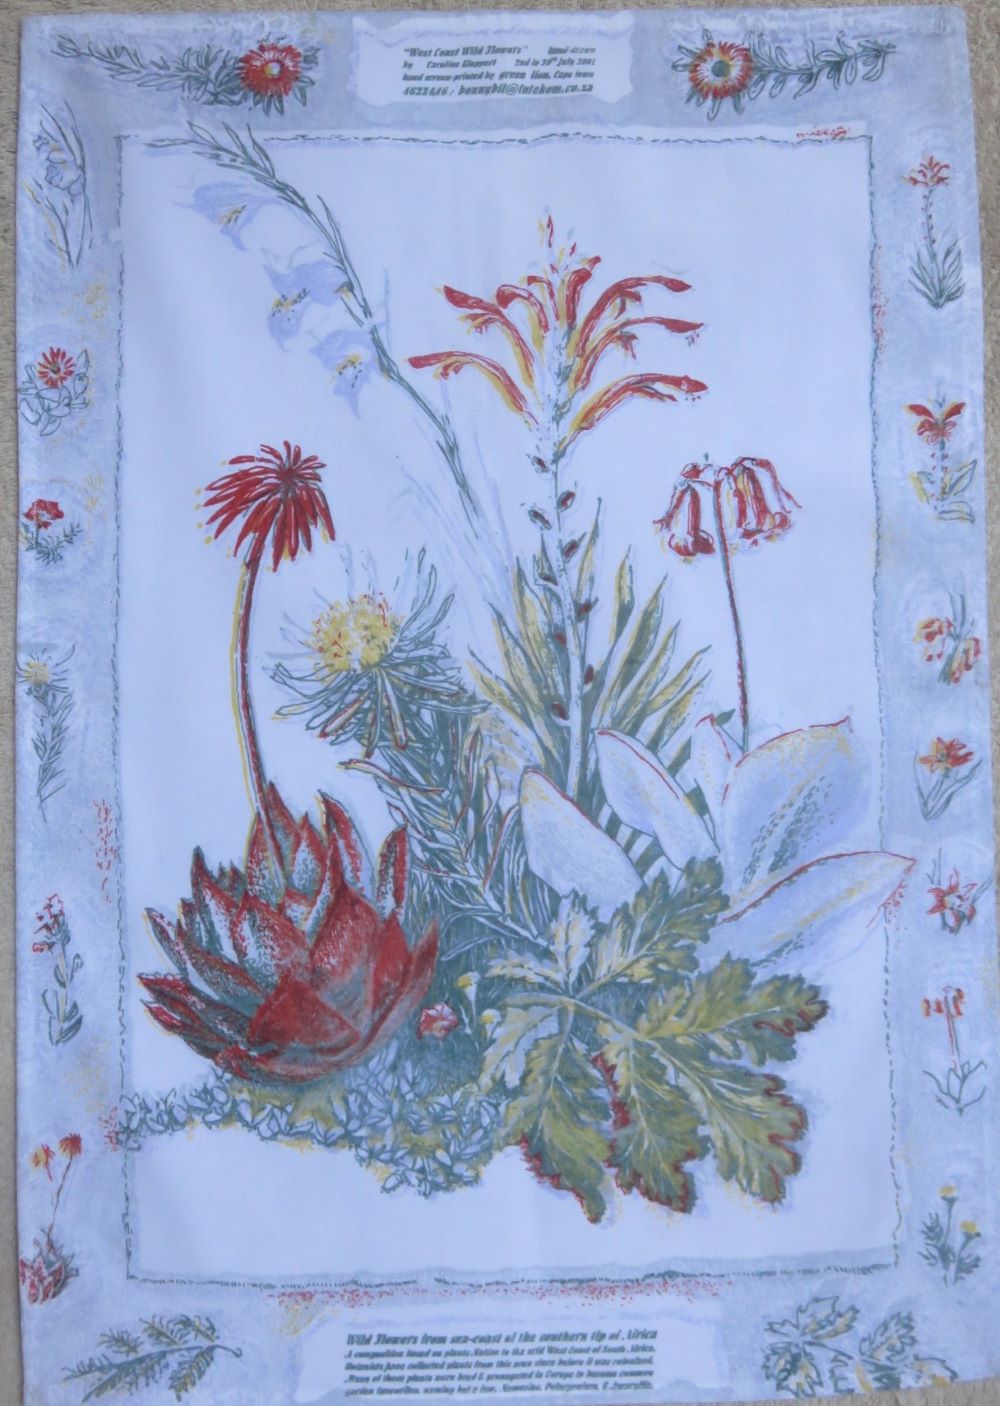 The same wild flower design with a border done for our range of tea towels.